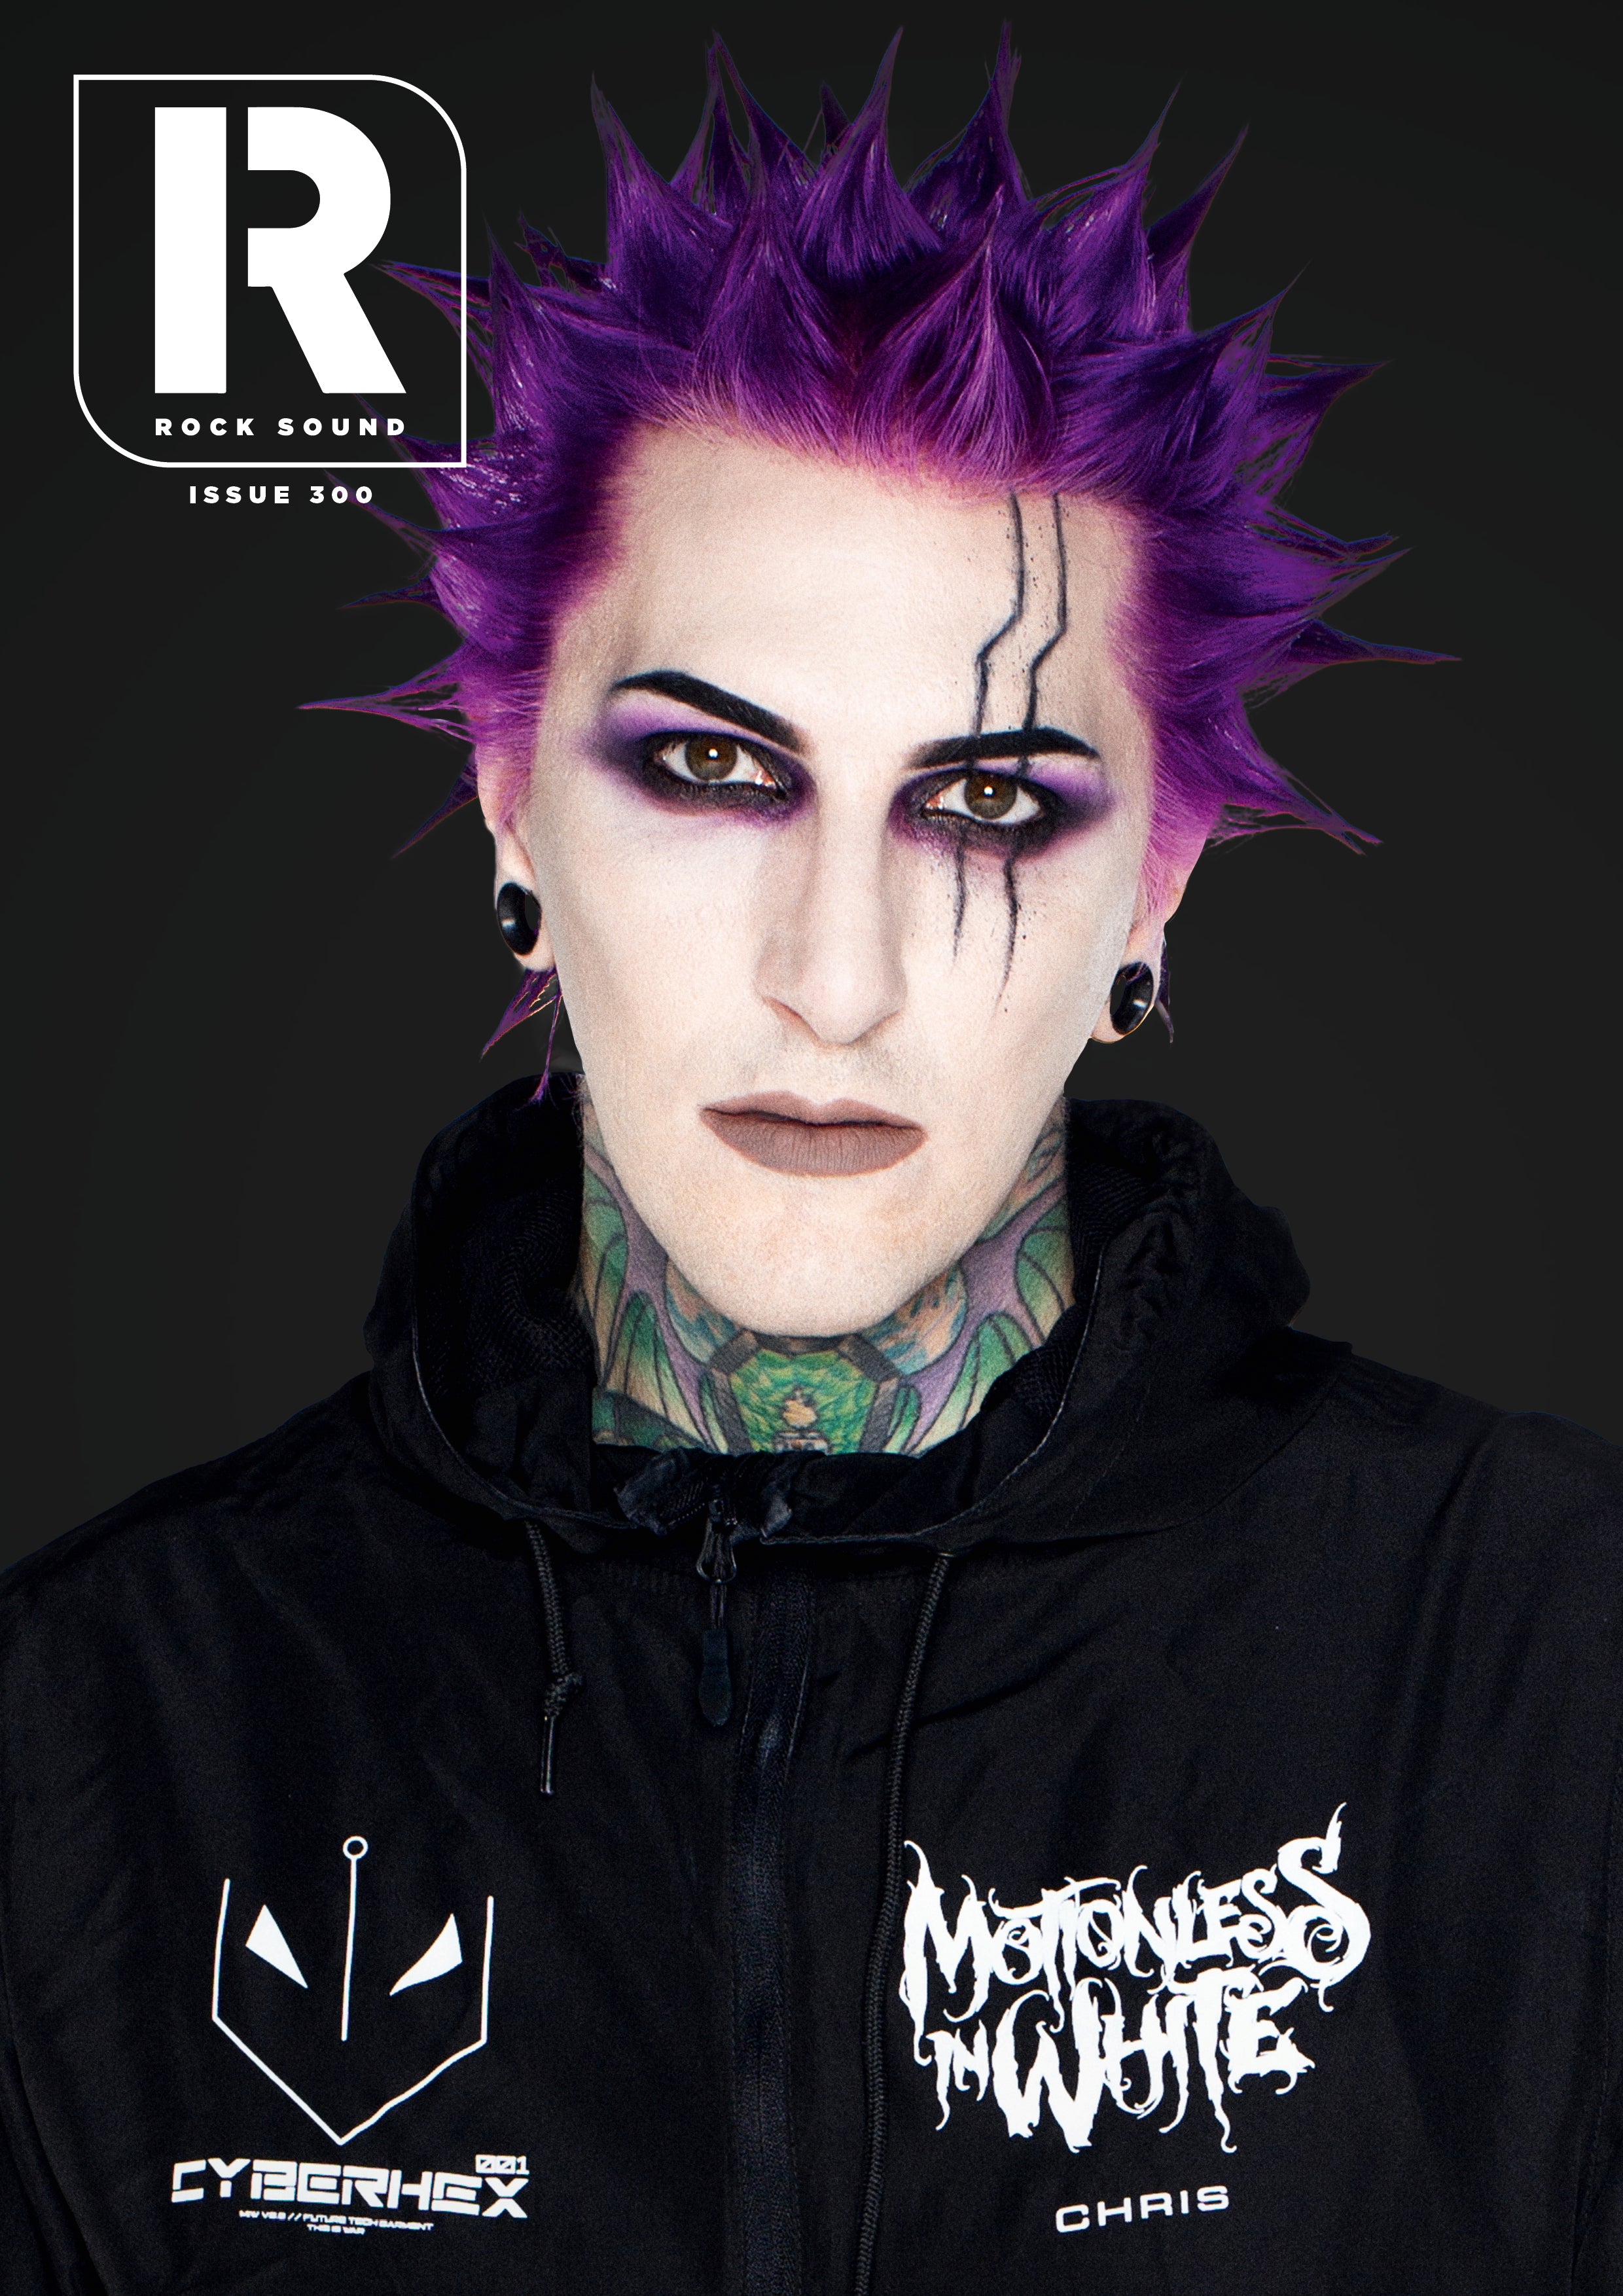 Rock Sound Issue 300 - Motionless in White Cover